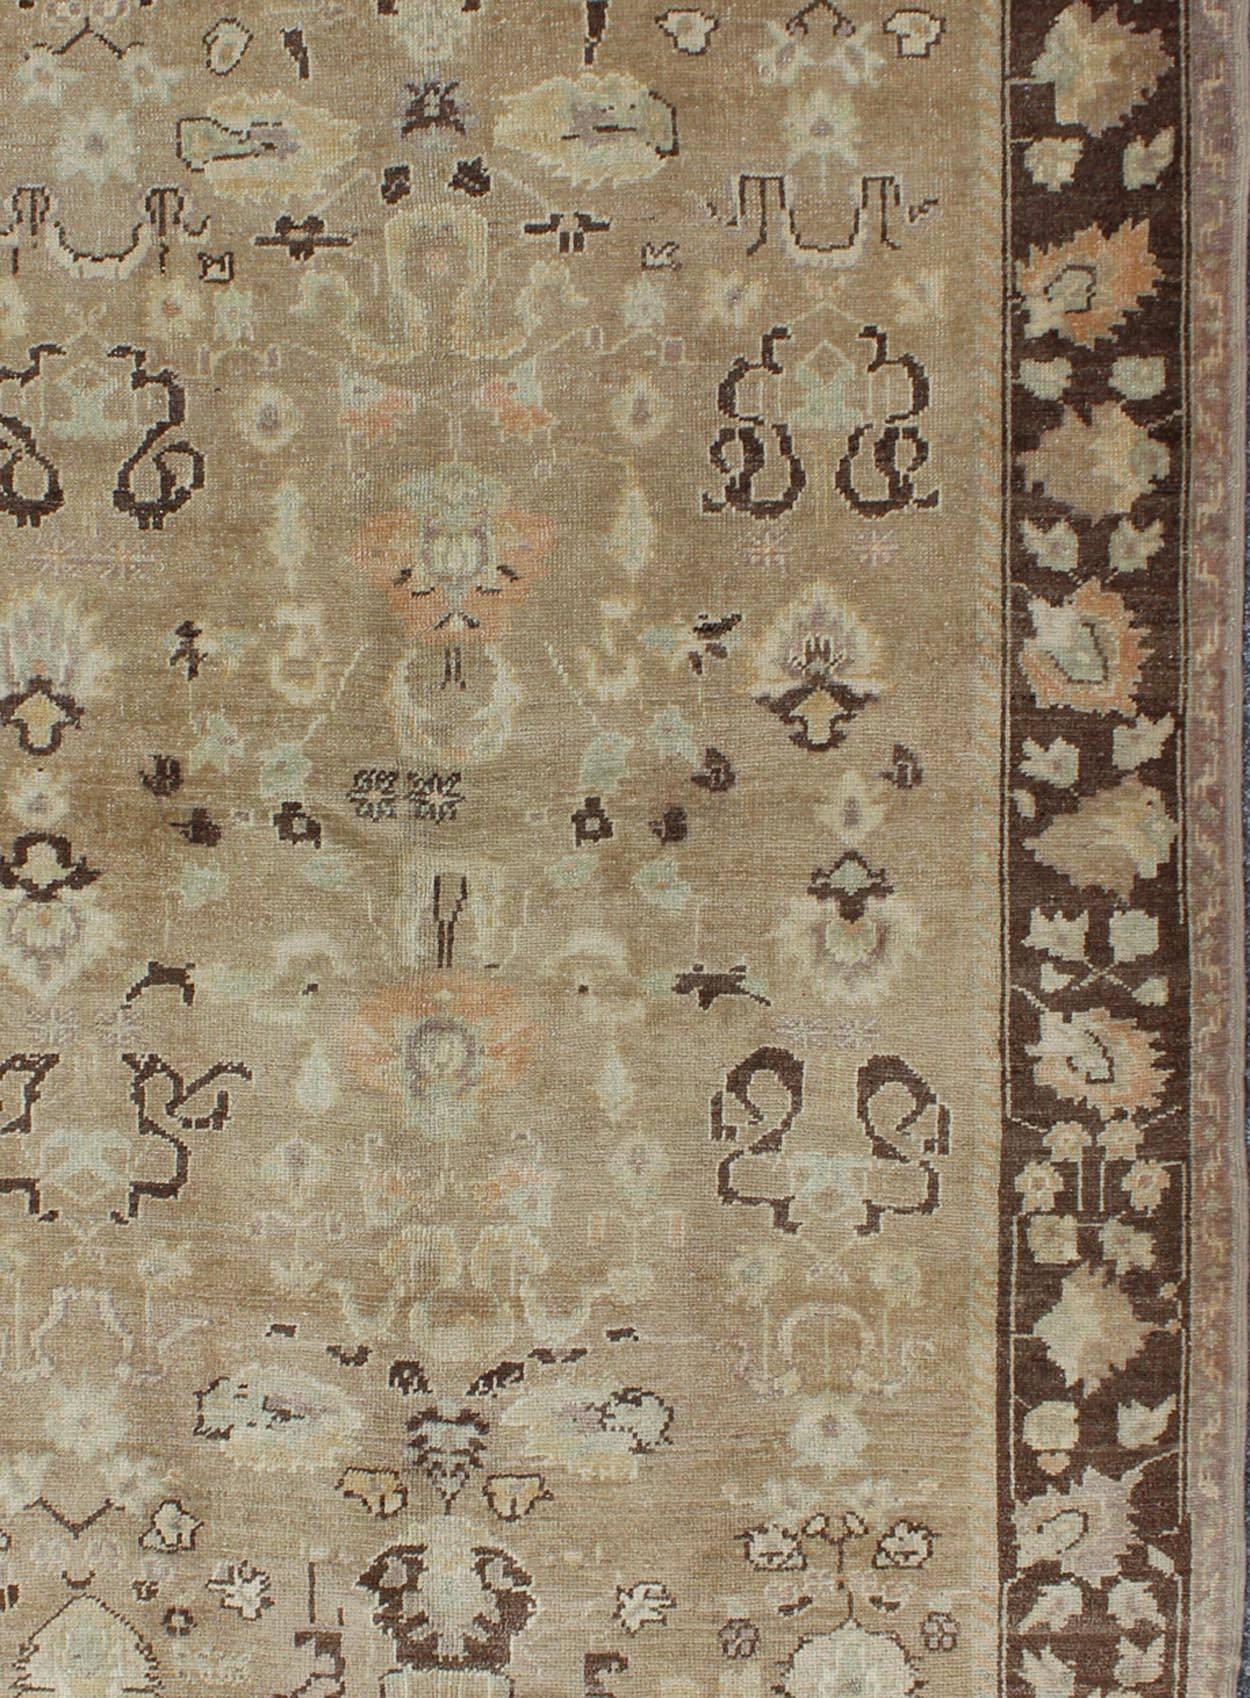 Mid-20th Century Vintage Turkish Oushak Rug with Floral Design in Chocolate Brown and Taupe